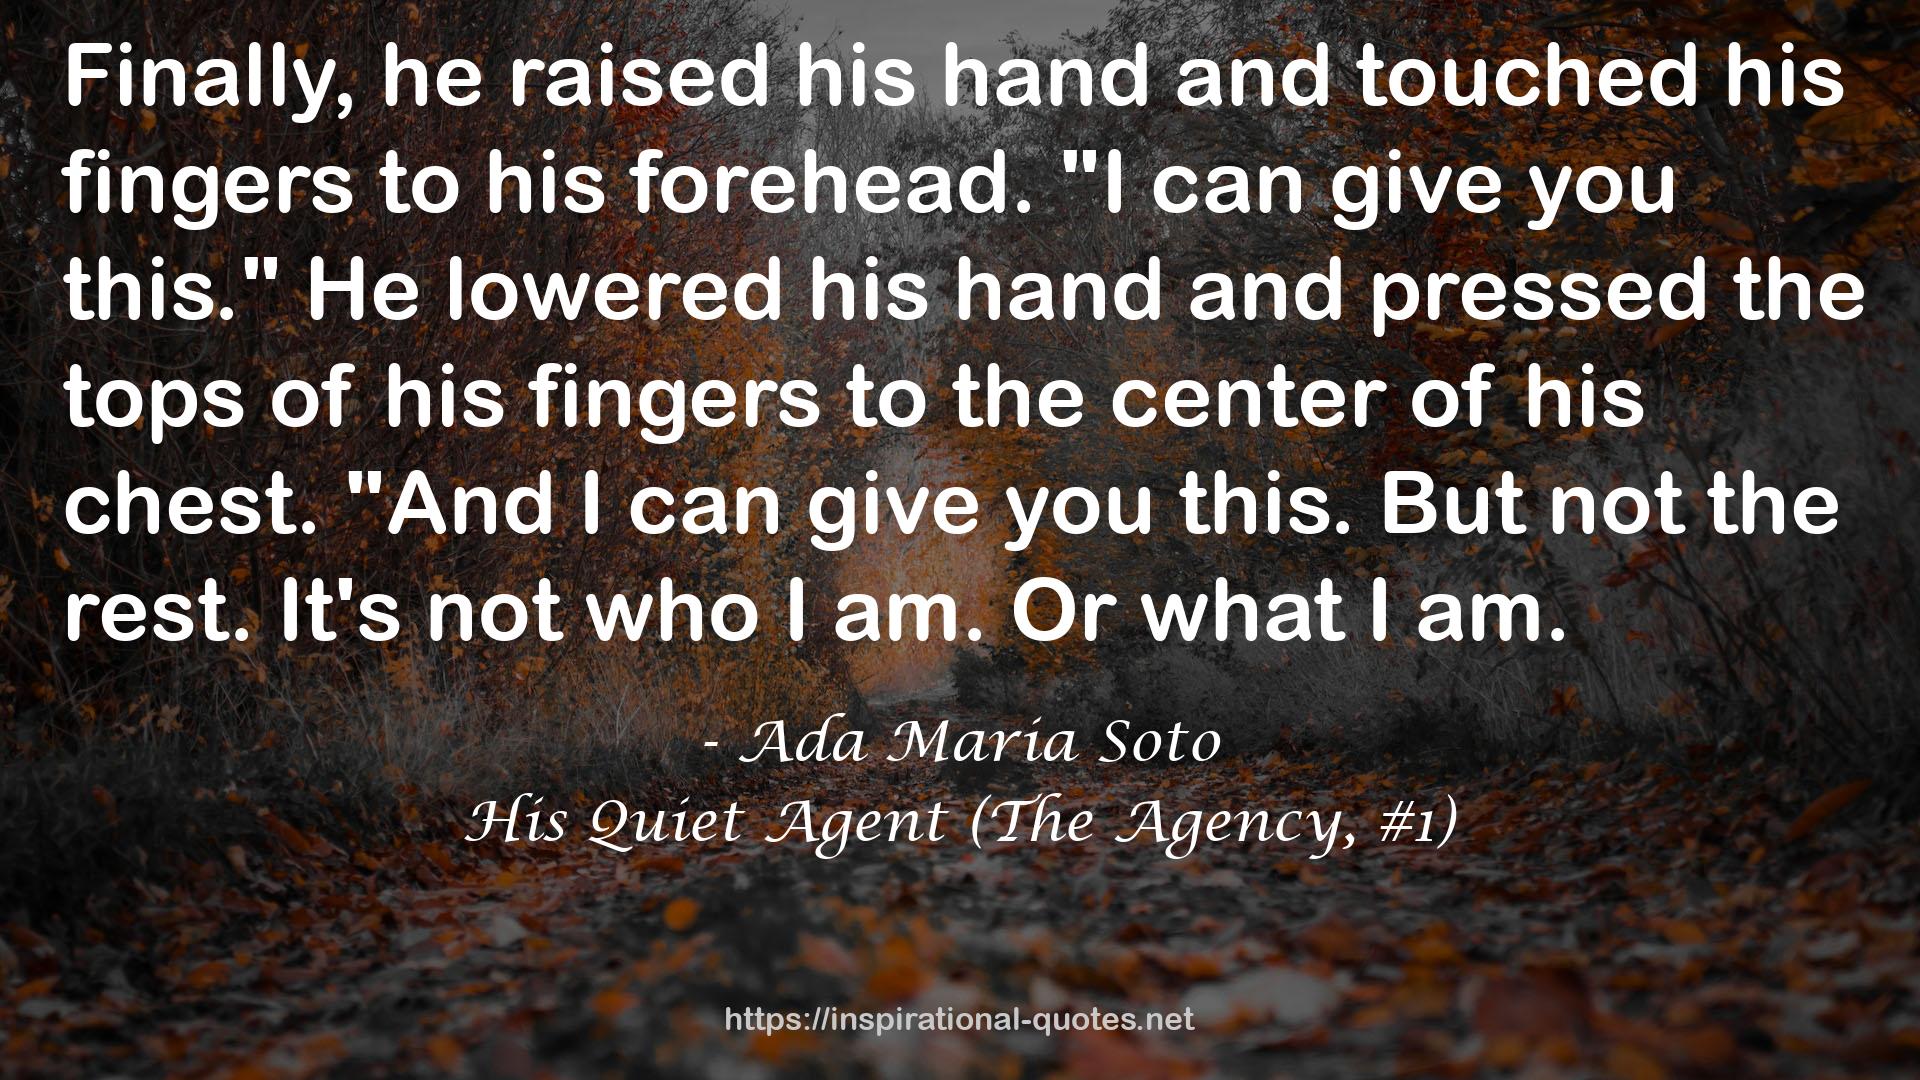 His Quiet Agent (The Agency, #1) QUOTES